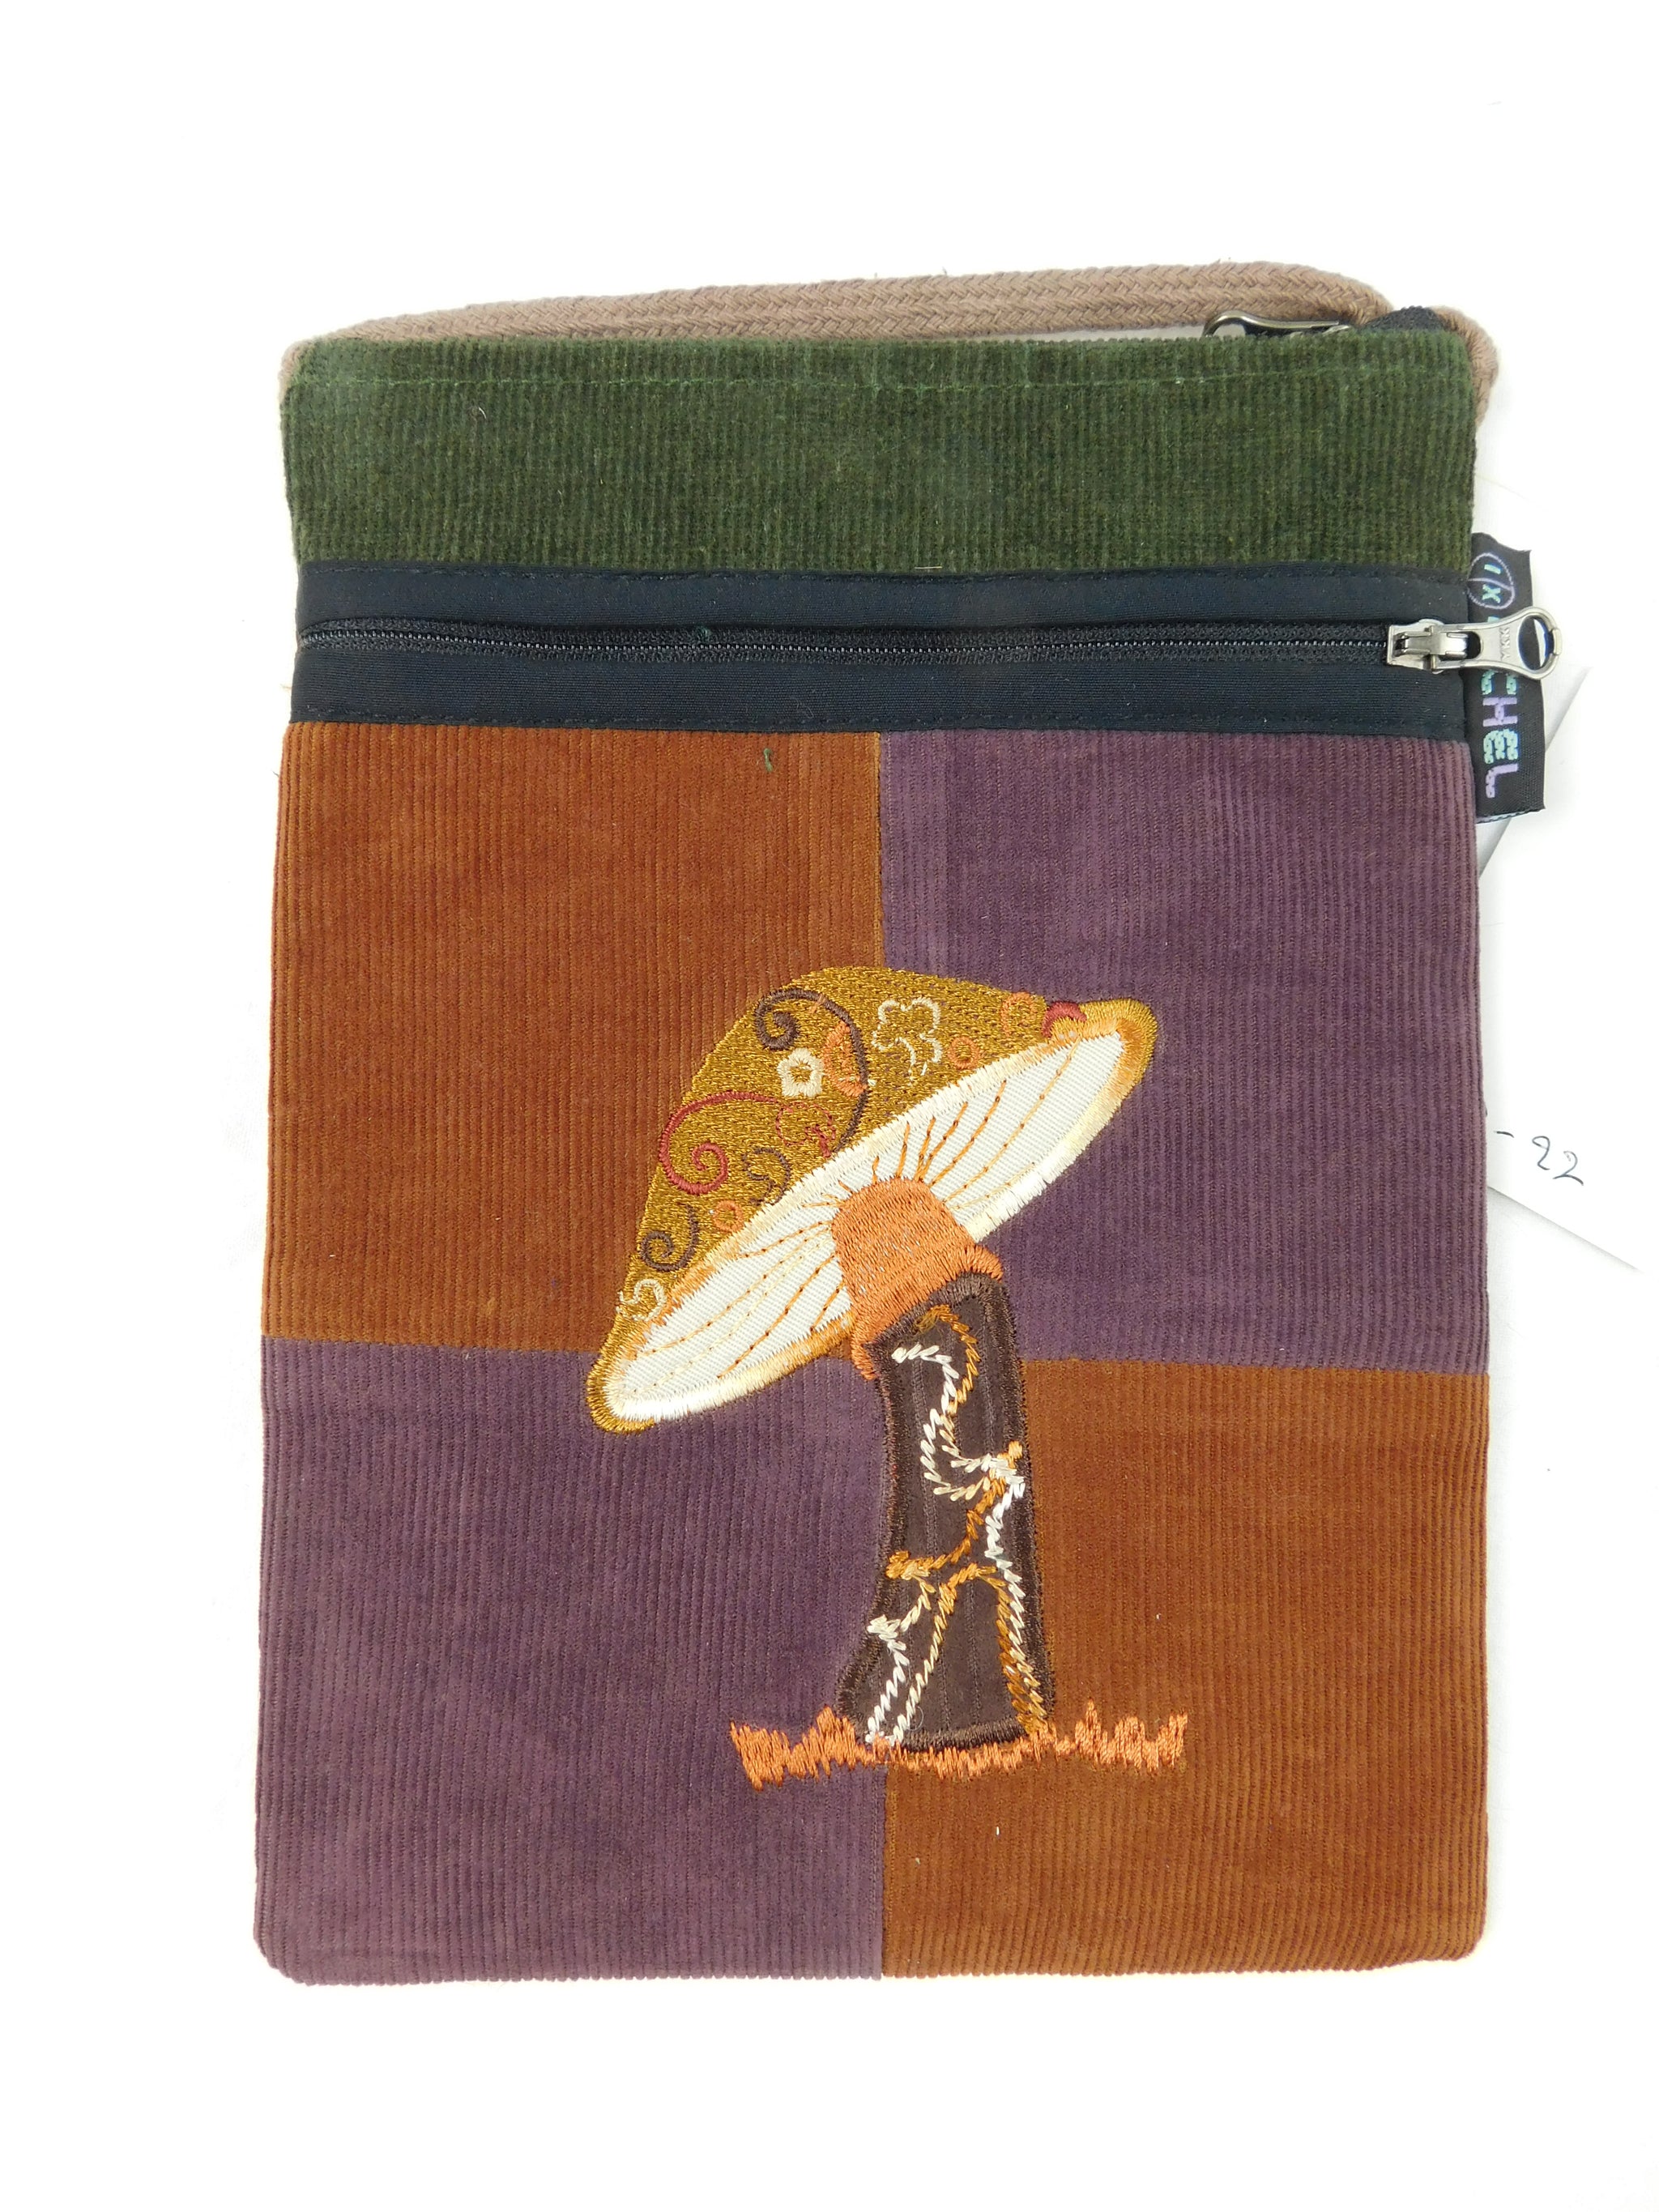 Passport purse in patchwork corduroy with mushroom embroidery